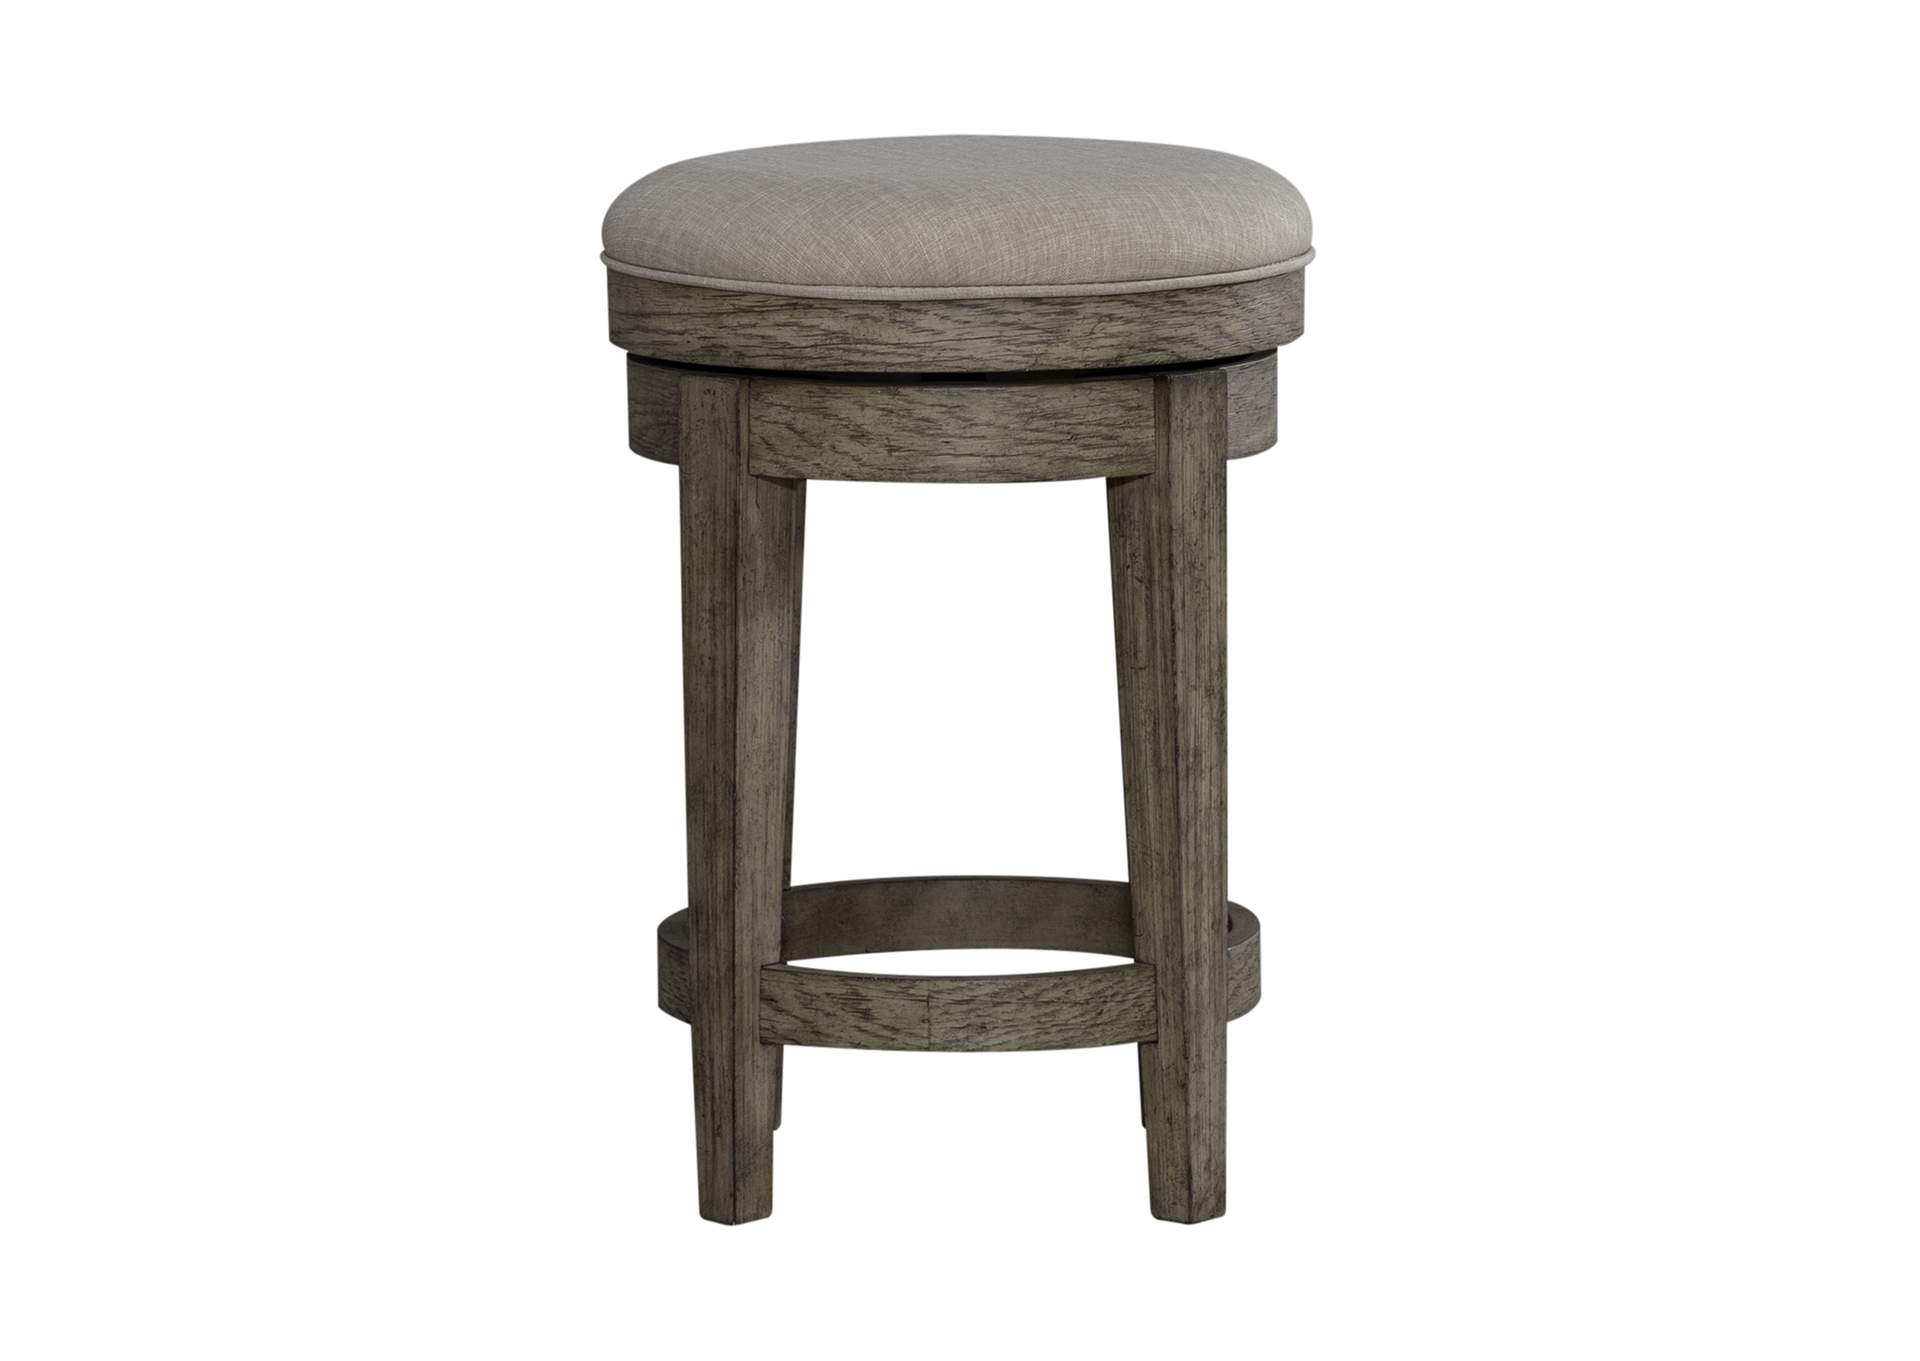 City Scape Upholstered Swivel Console Stool,Liberty